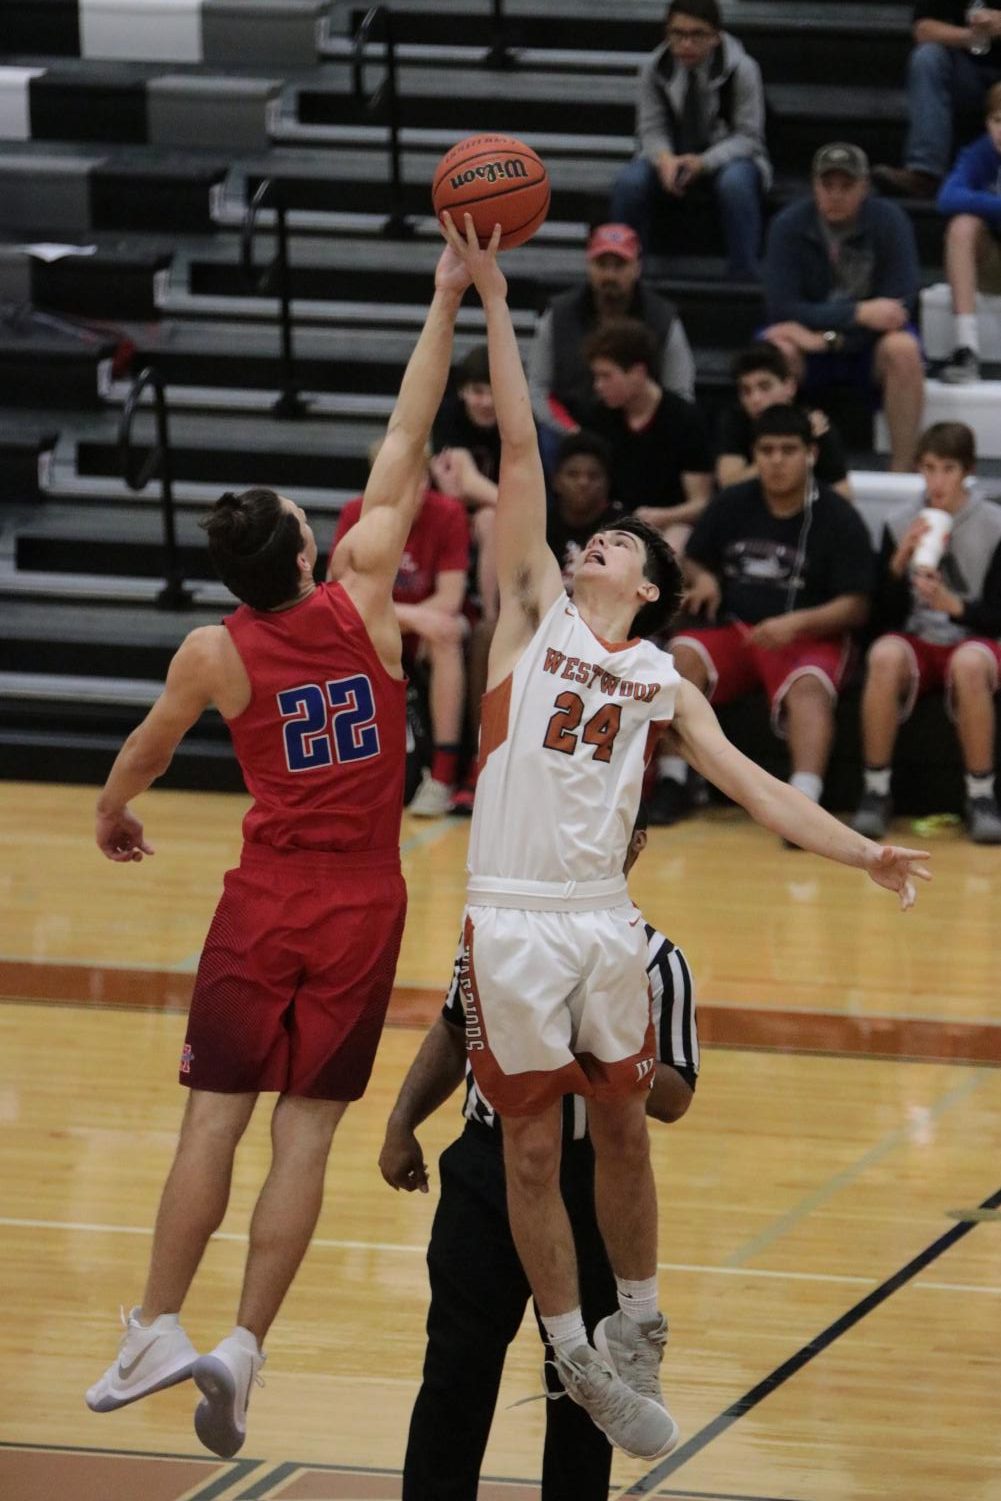 Varsity+Boys+Basketball+Conquers+the+Hays+Rebels+59-49